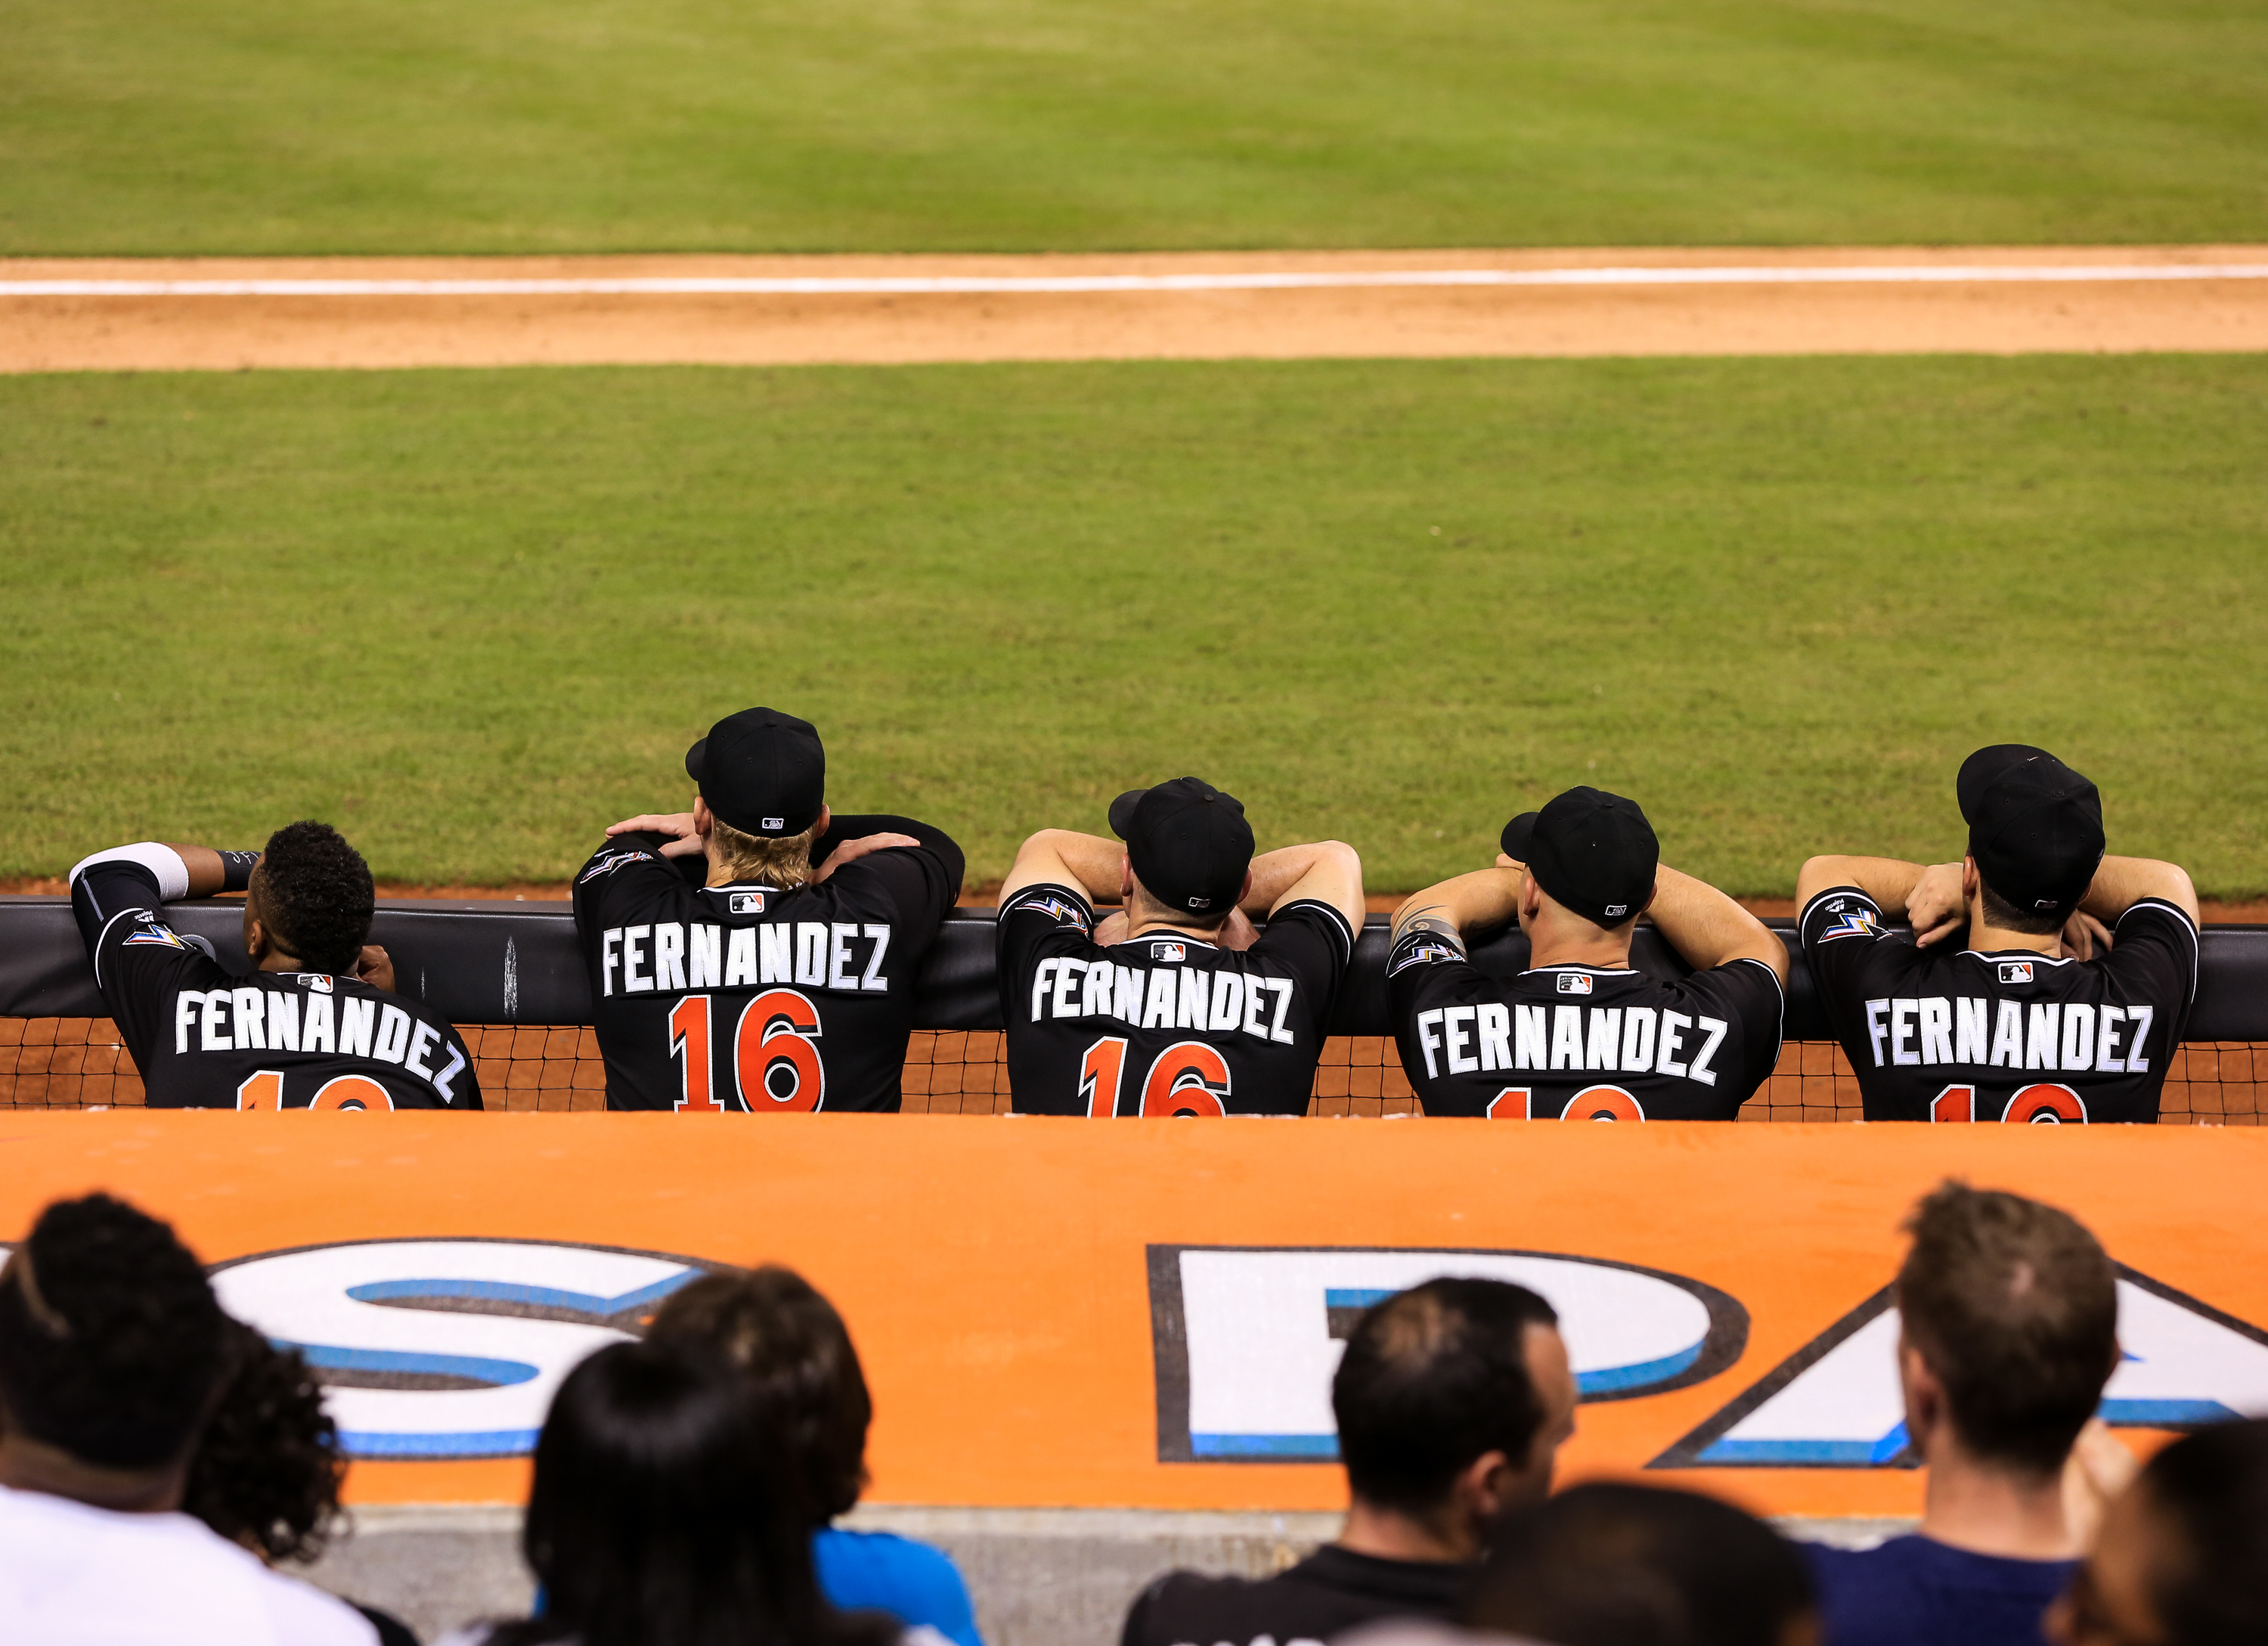 MIAMI, FL - SEPTEMBER 26: Miami Marlins players look on from the dugout wearing Jose Fernandez jerseys in honor of the late pitcher during the game against the New York Mets at Marlins Park on September 26, 2016 in Miami, Florida. (Photo by Rob Foldy/Getty Images) ORG XMIT: 607685695 ORIG FILE ID: 610610508